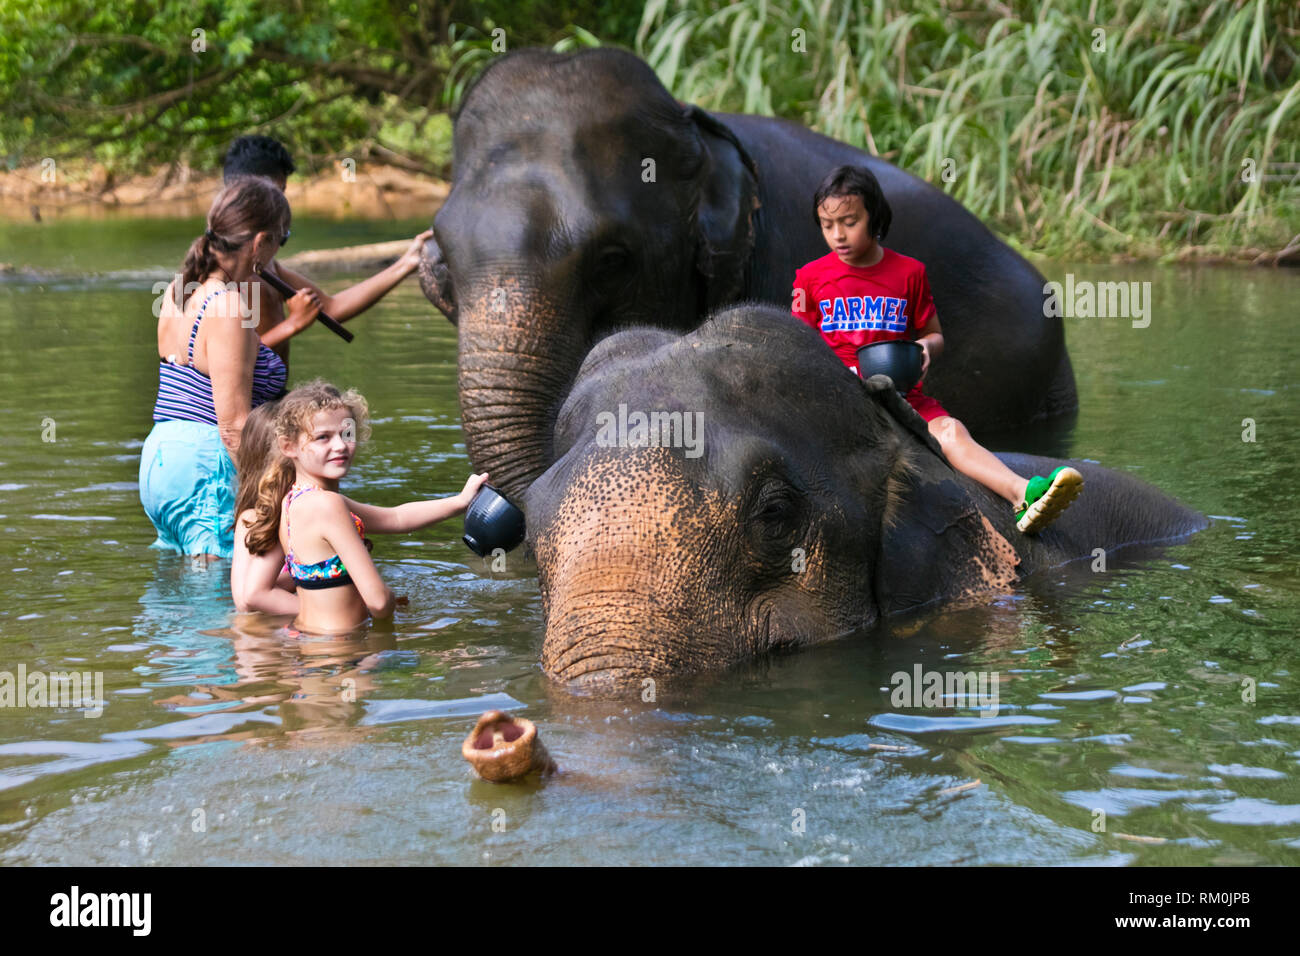 Washing elephants is the human way to support these animals and their mahoots - KHAO SOK, THAILAND Stock Photo